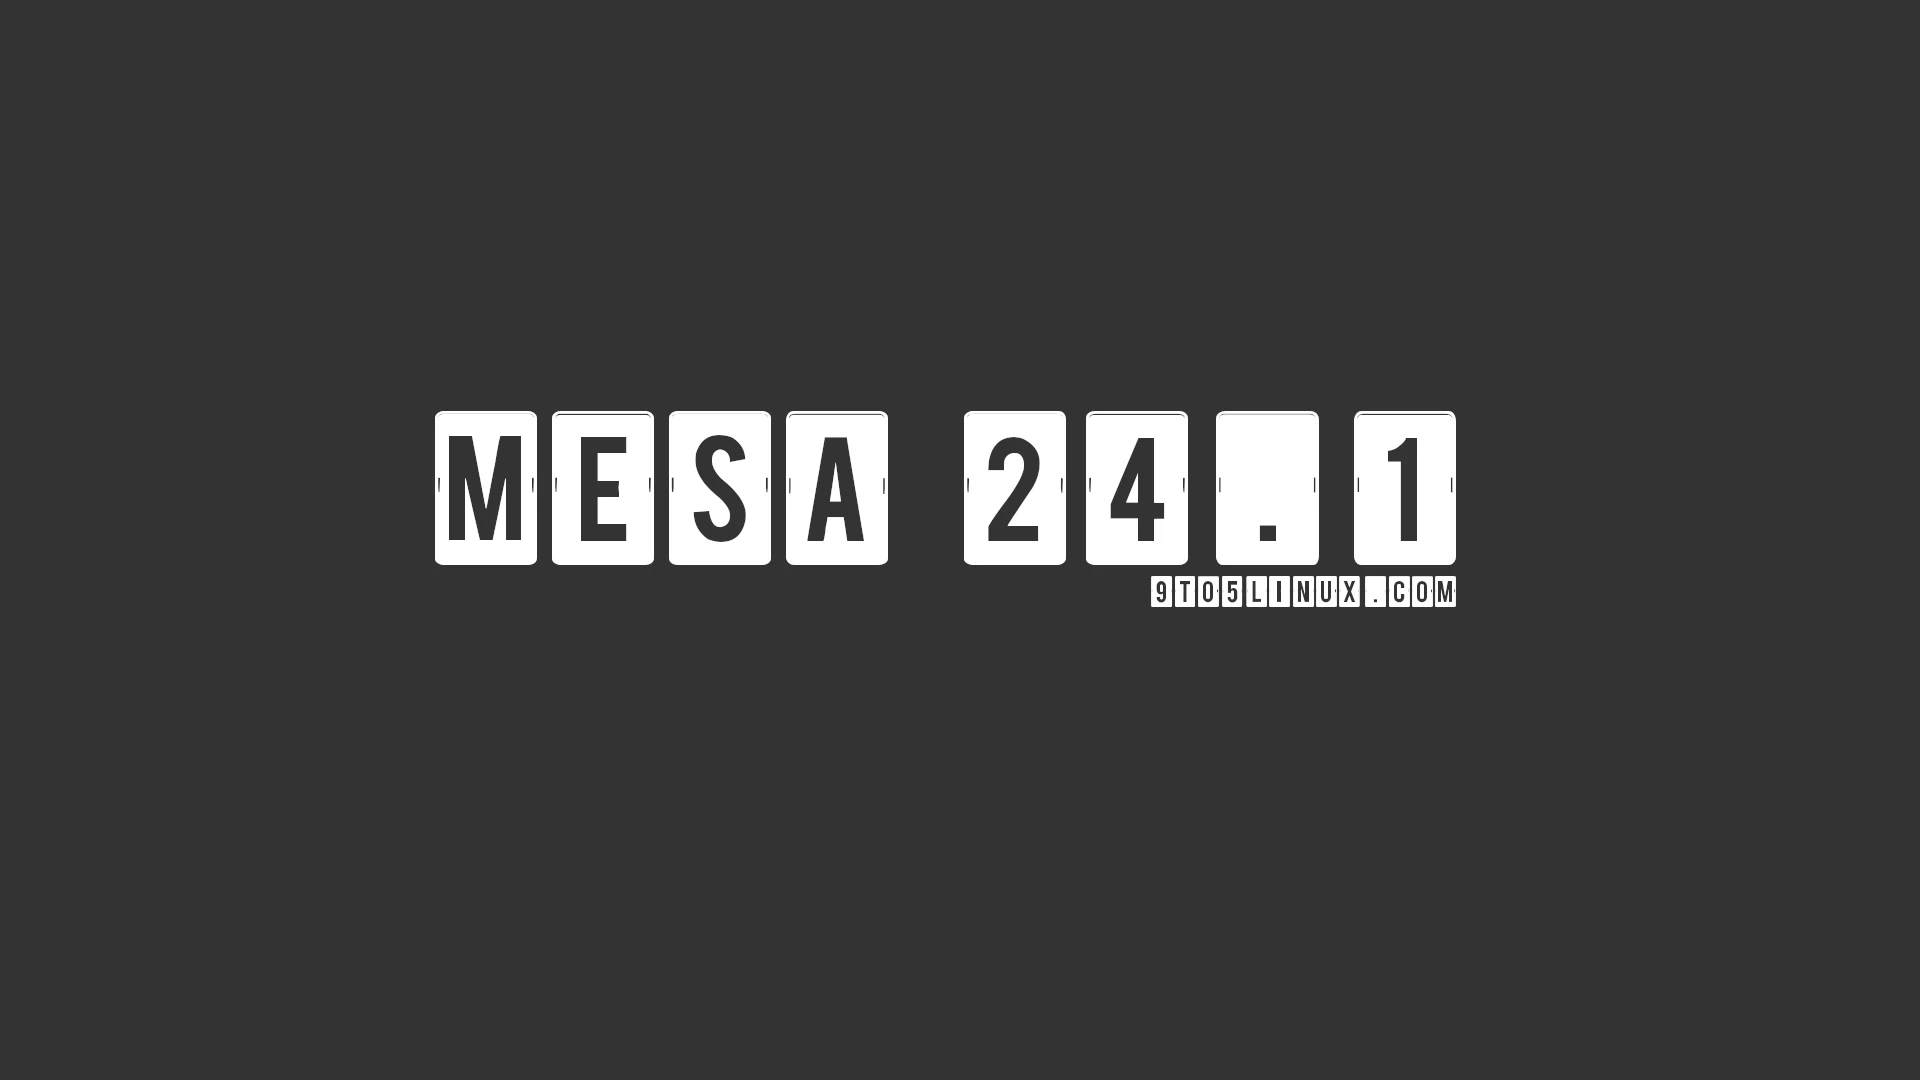 Mesa 24.1 Linux Graphics Stack: New Release with Vulkan Explicit Sync Support